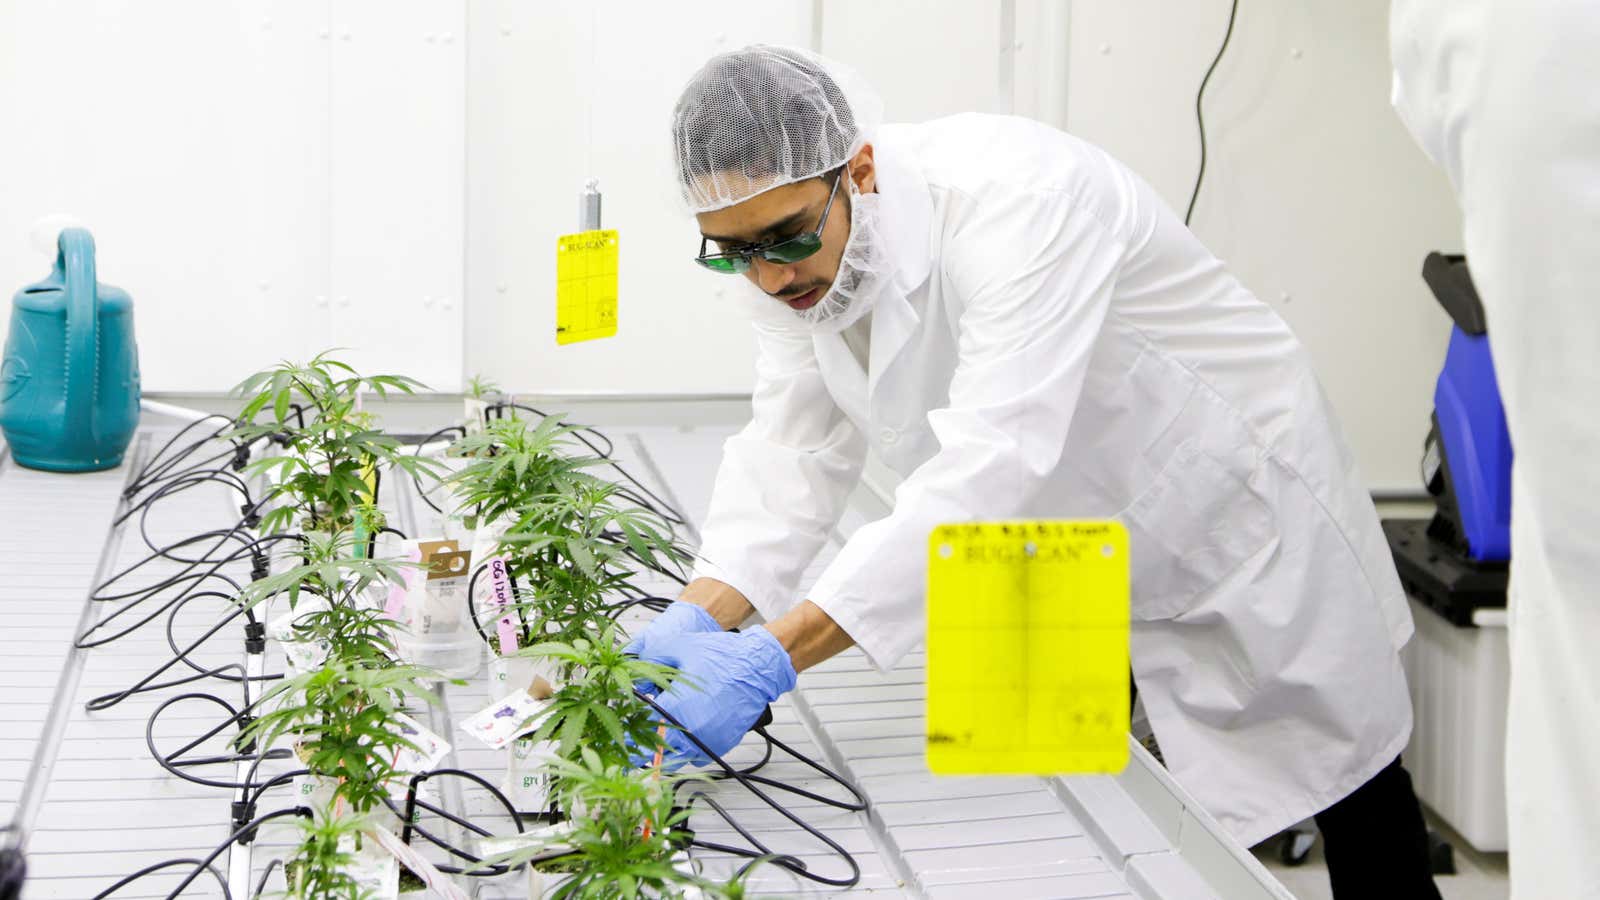 The Colorado State University program aims to prepare students to work in cannabis labs.